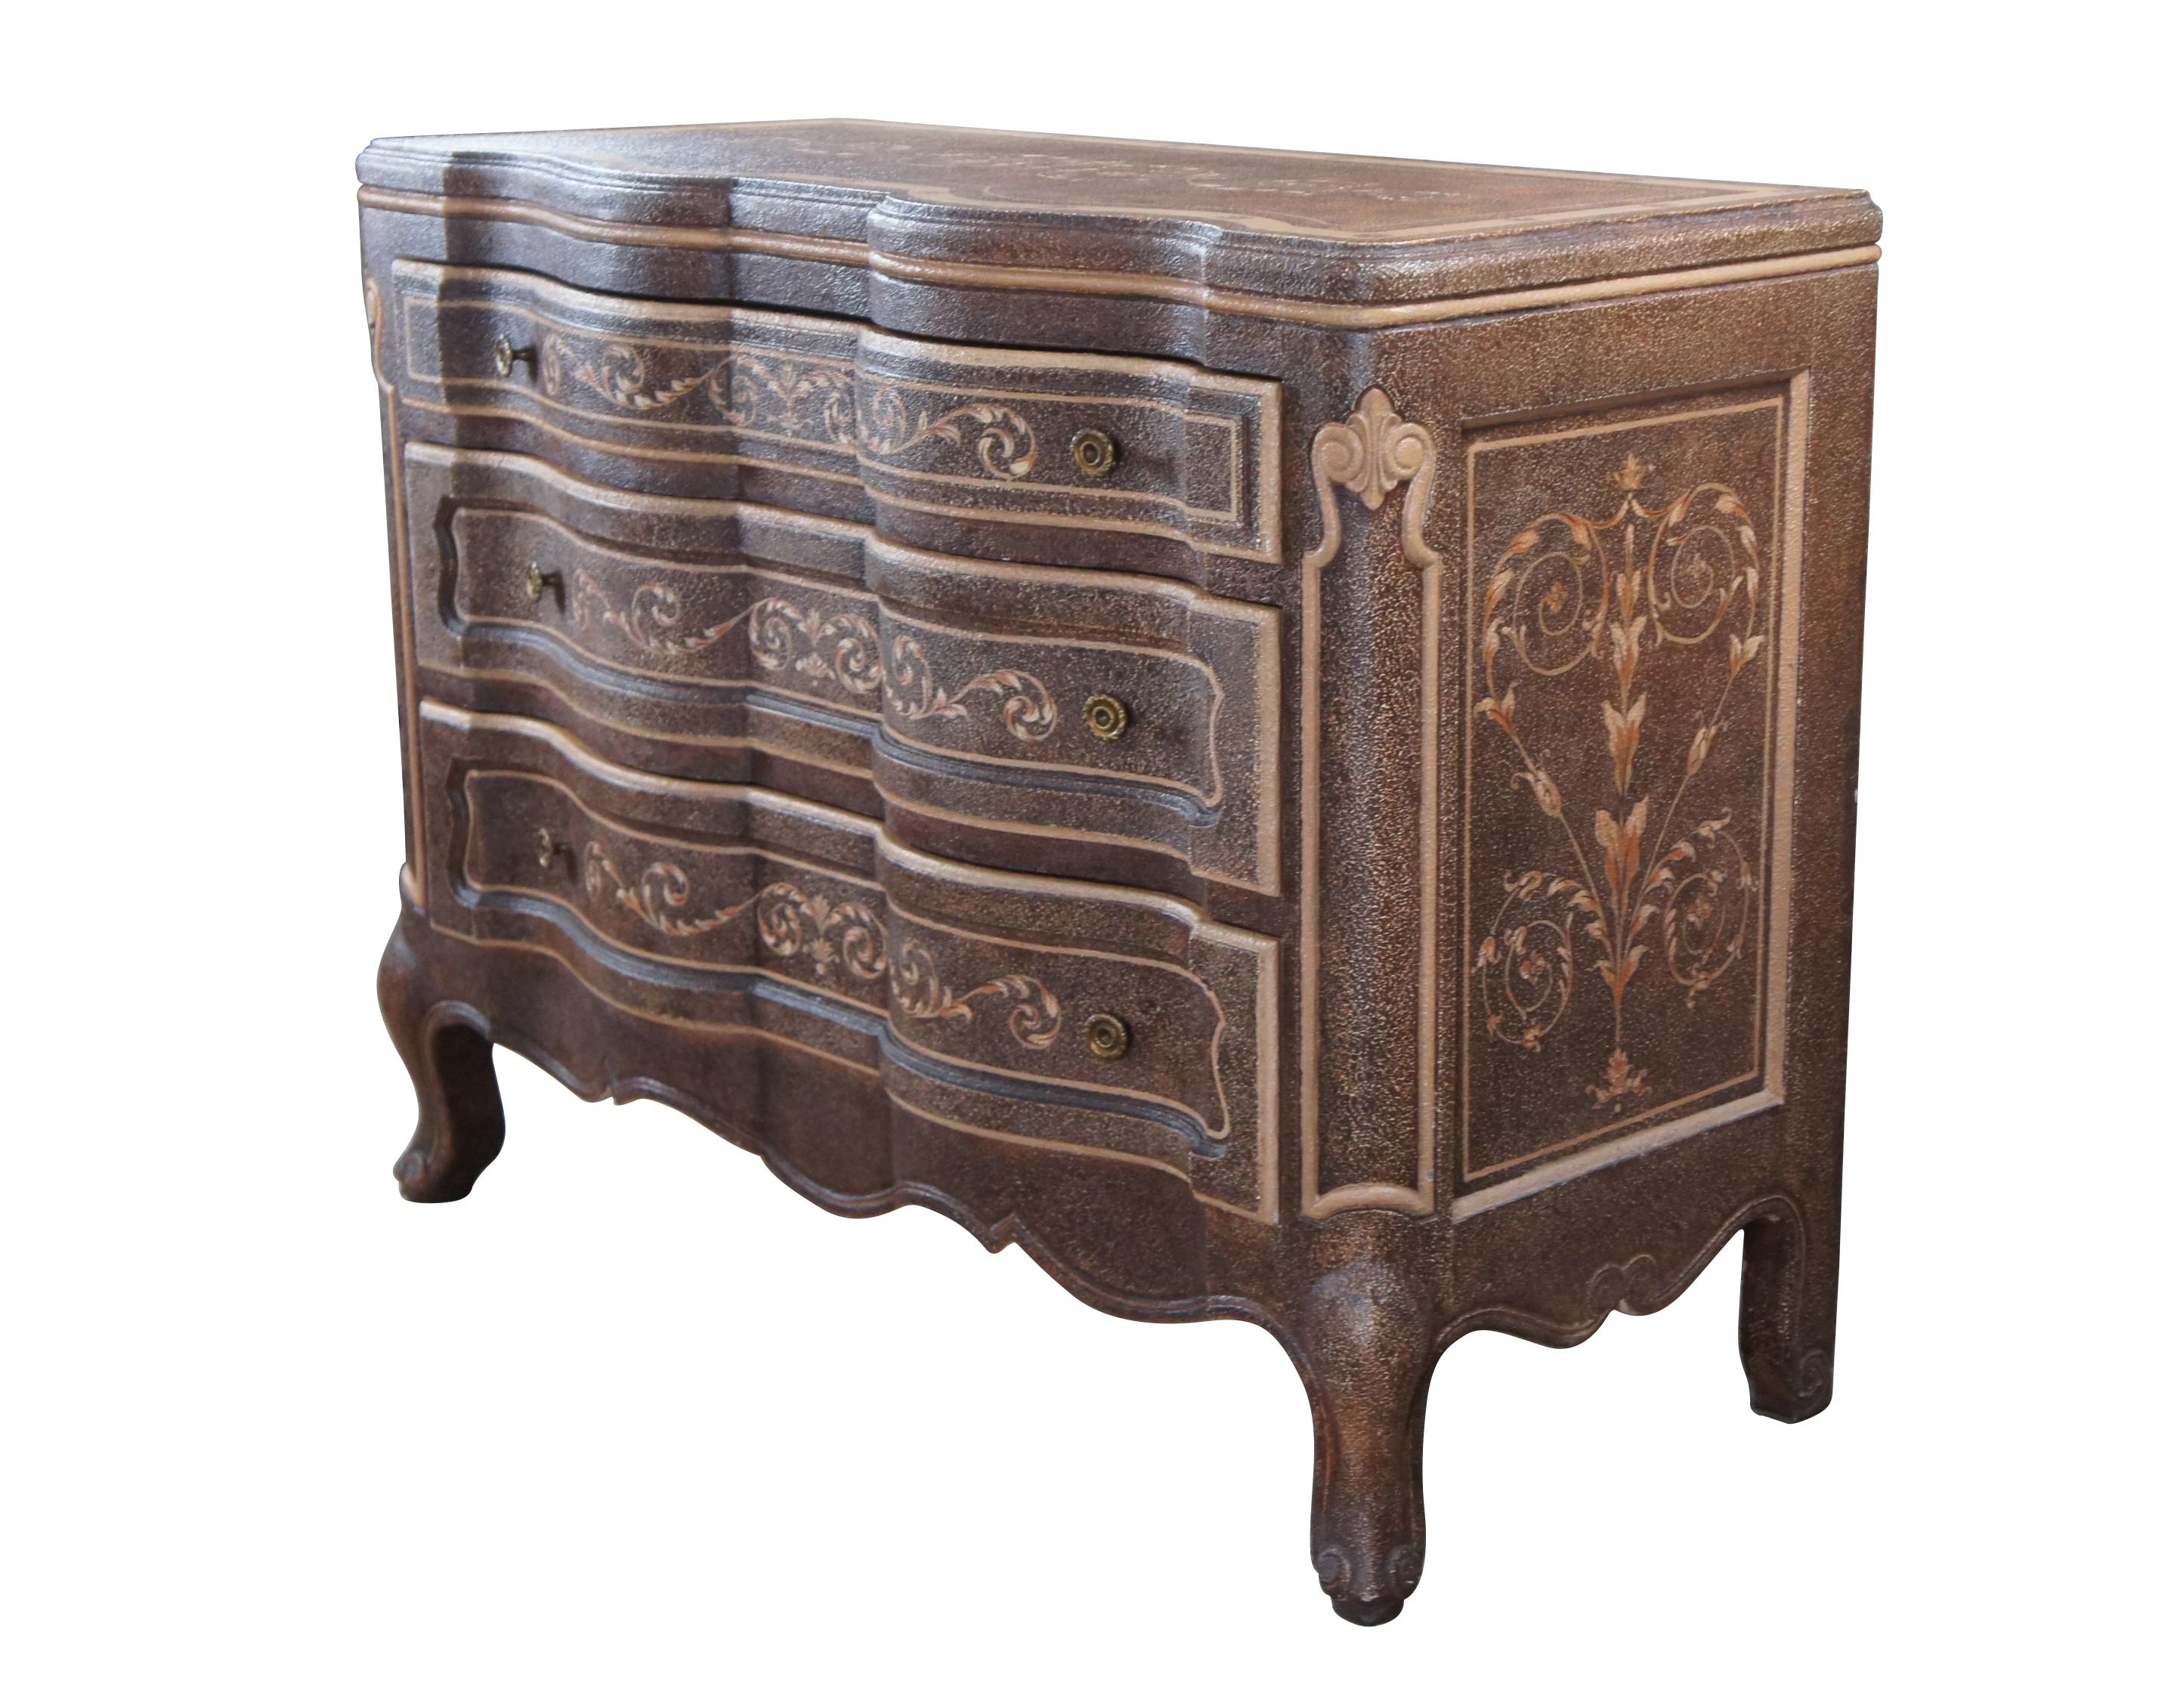 Maitland Smith Neoclassical Oxbow Serpentine form Chest, circa 1990s. Features a textured hand painted finish of scrolled floral / acanthus accents. The chest has three dovetailed drawers with brass hardware and is supported by cabriole feet. Great